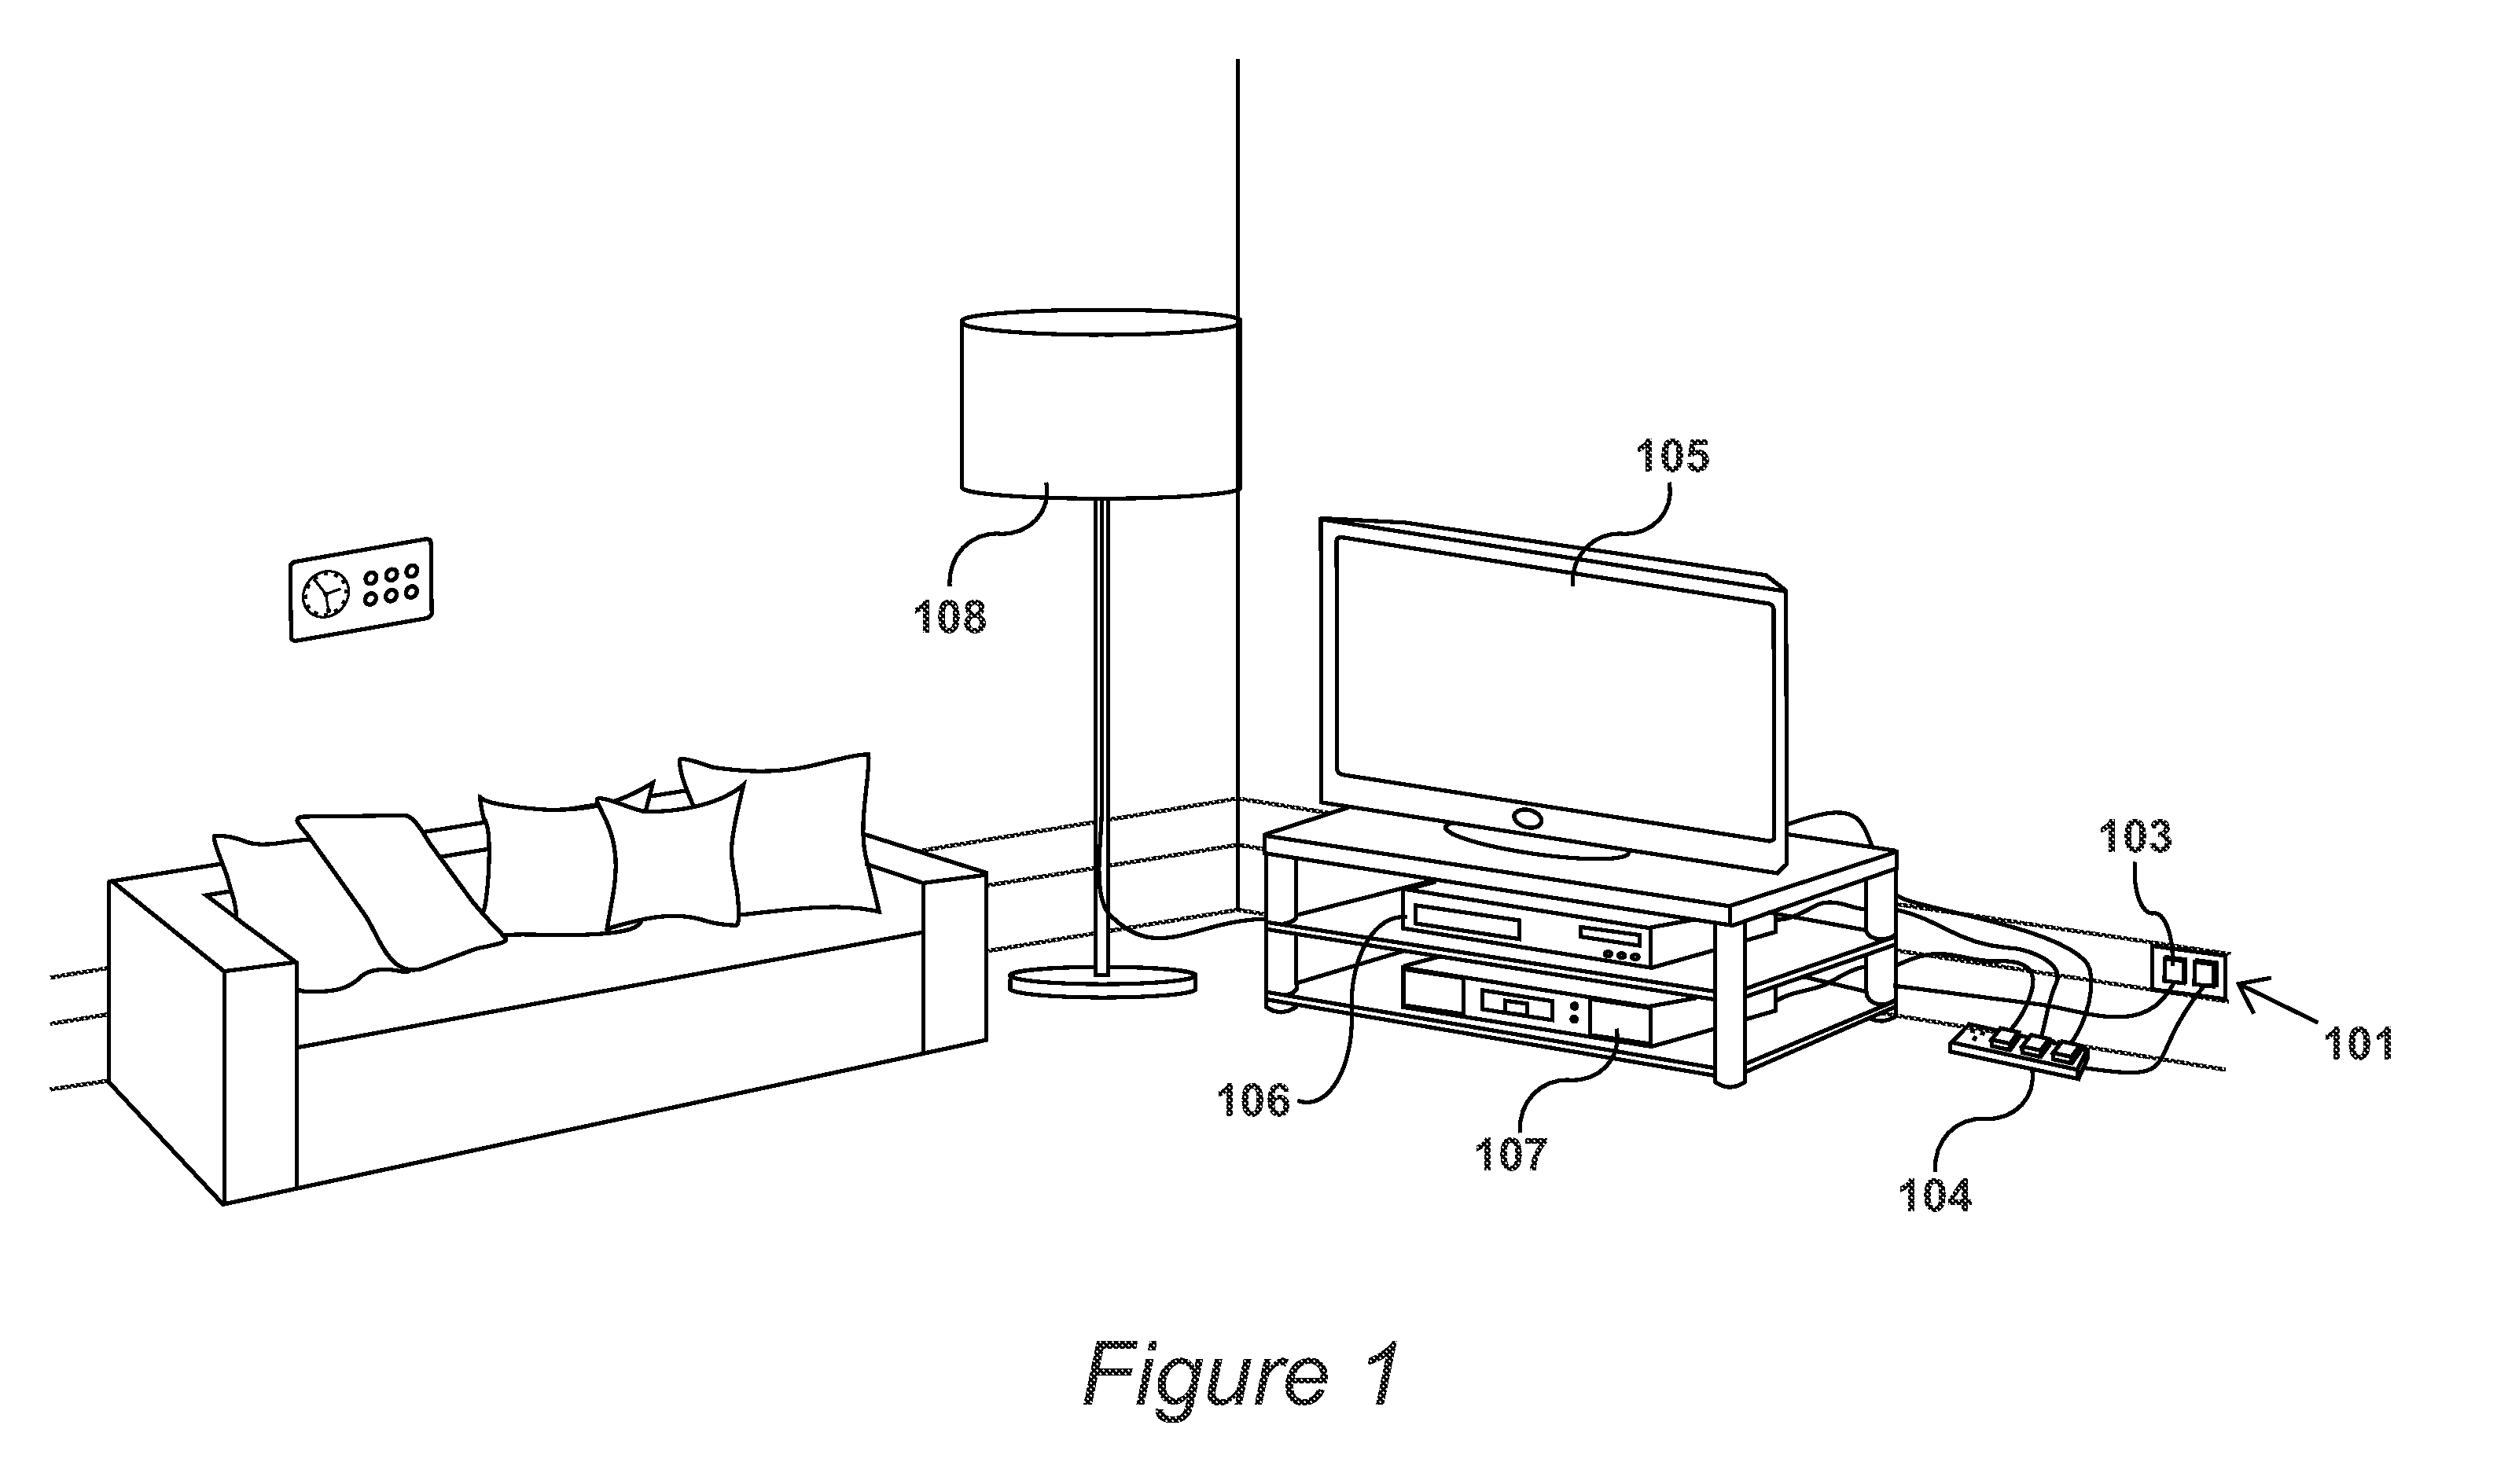 Electrical Supply Apparatus